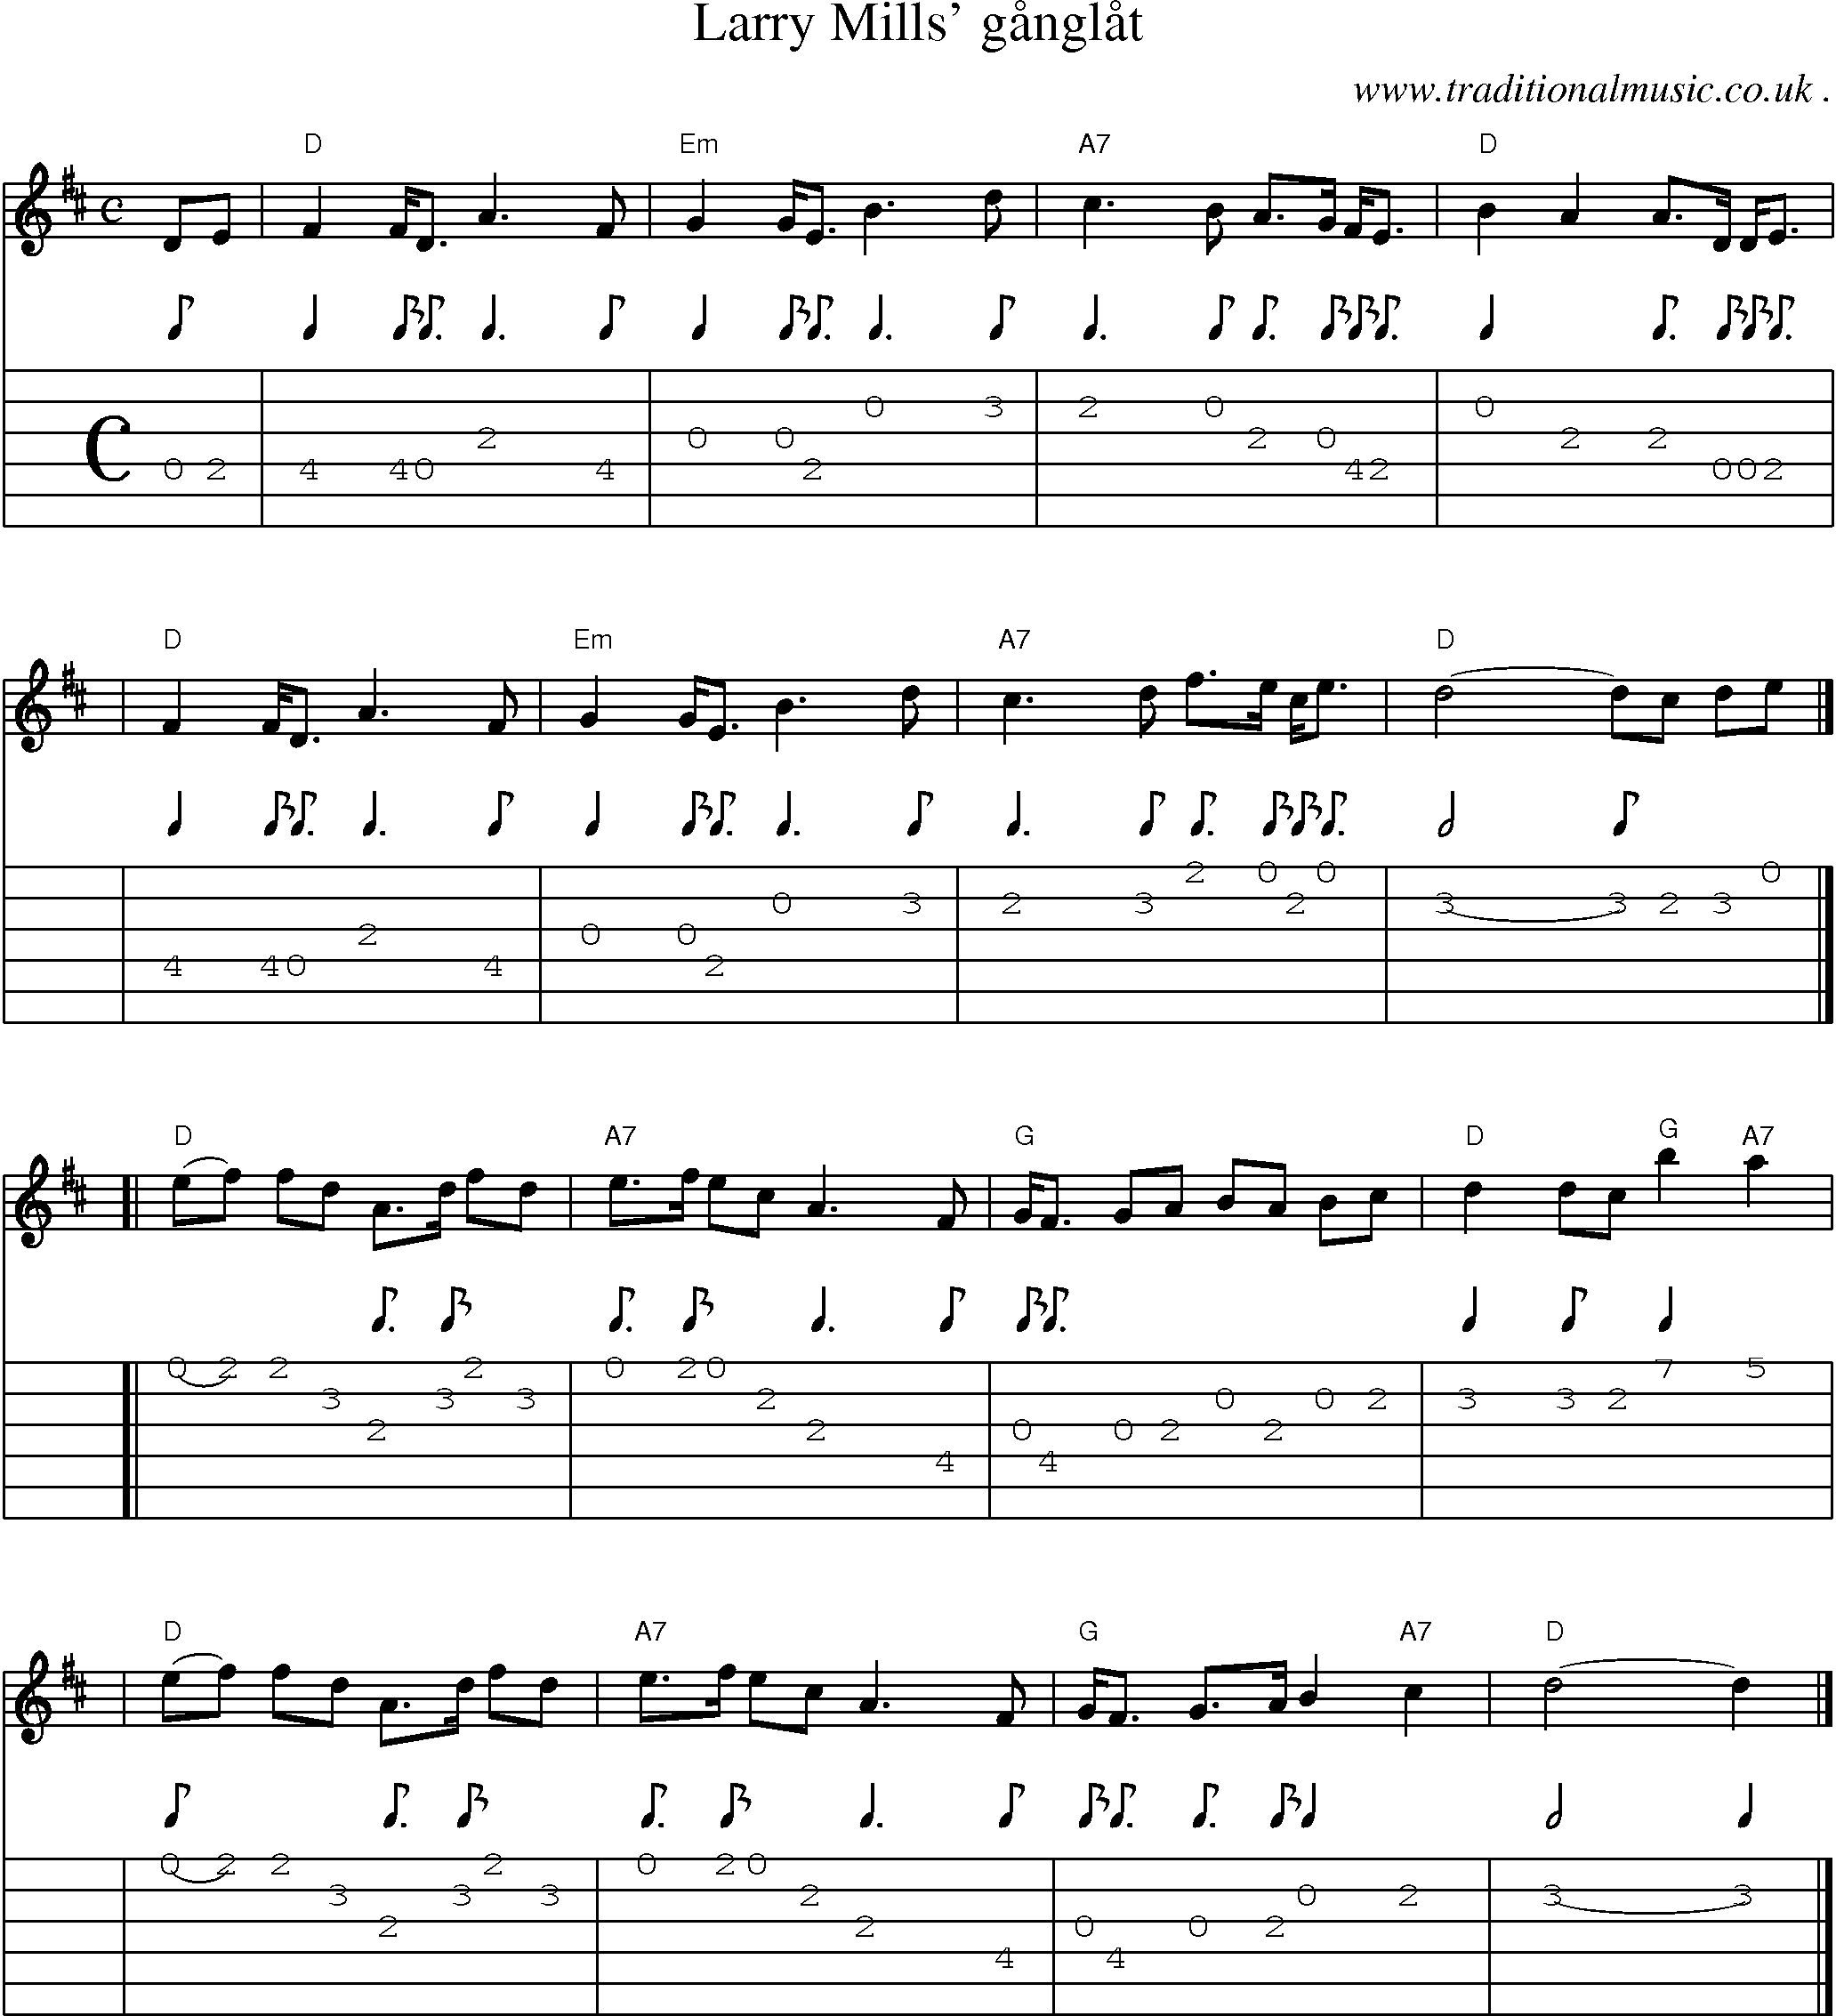 Sheet-music  score, Chords and Guitar Tabs for Larry Mills Gaanglaat